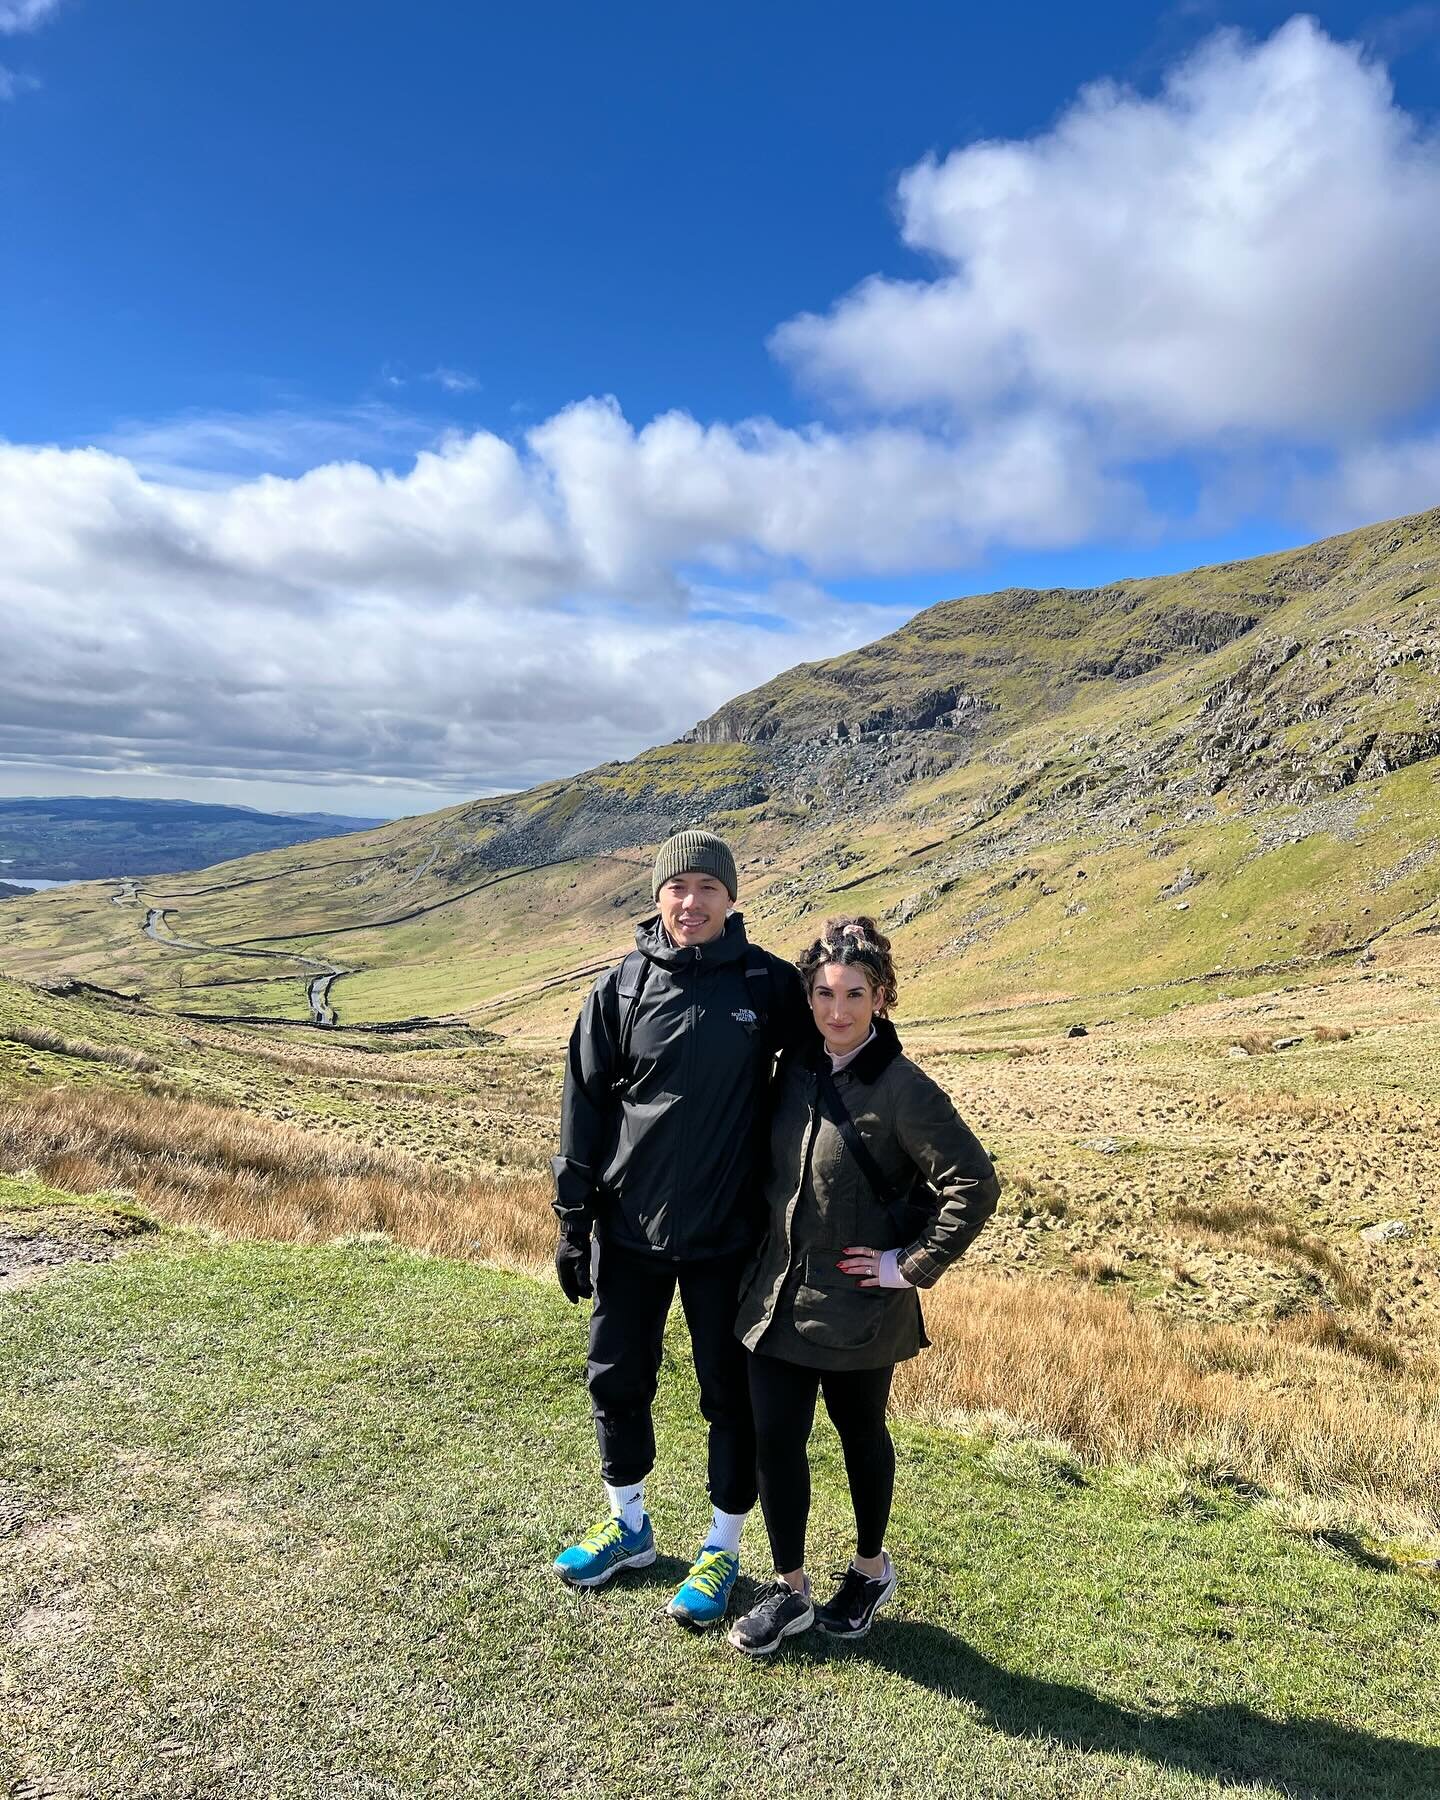 Lake District, you were brilliant. 

Hiking is quickly becoming something we&rsquo;re incredibly fond of. 

Having never skied ⛷️ growing up, hiking is the closest thing I can get to being completely immersed in the mountains and scenery. 

Proper wa